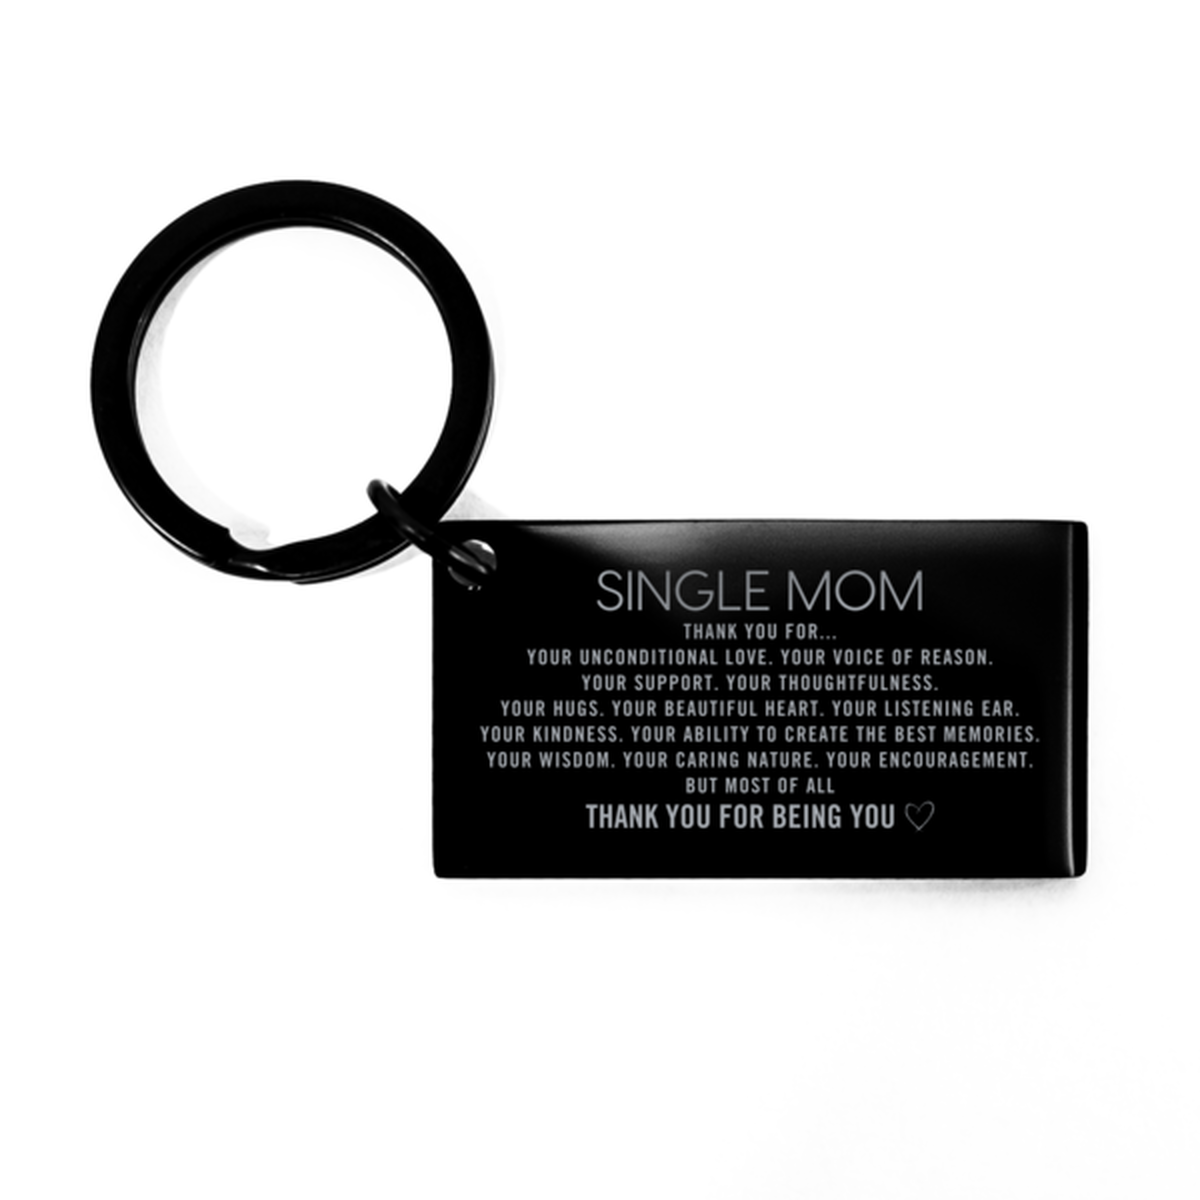 Single Mom Keychain Custom, Engraved Gifts For Single Mom Christmas Graduation Birthday Gifts for Men Women Single Mom Thank you for Your unconditional love